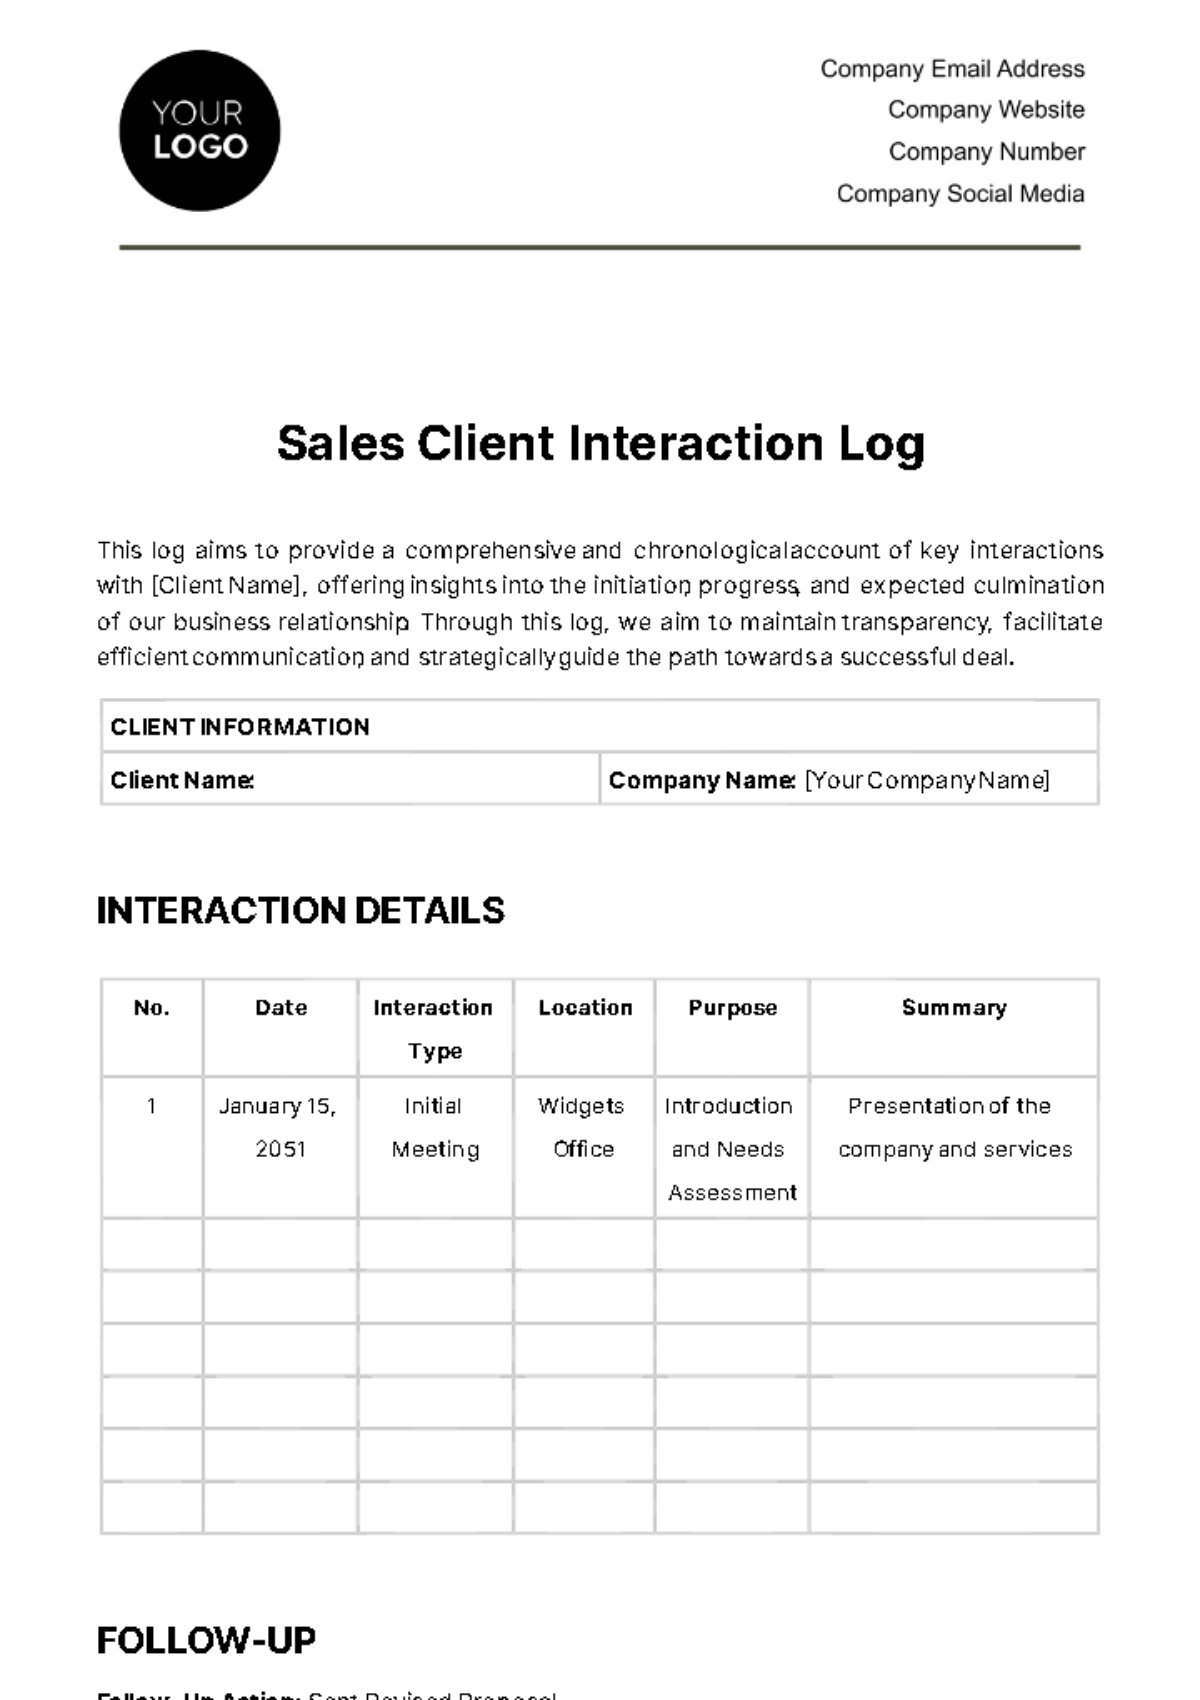 Free Sales Client Interaction Log Template